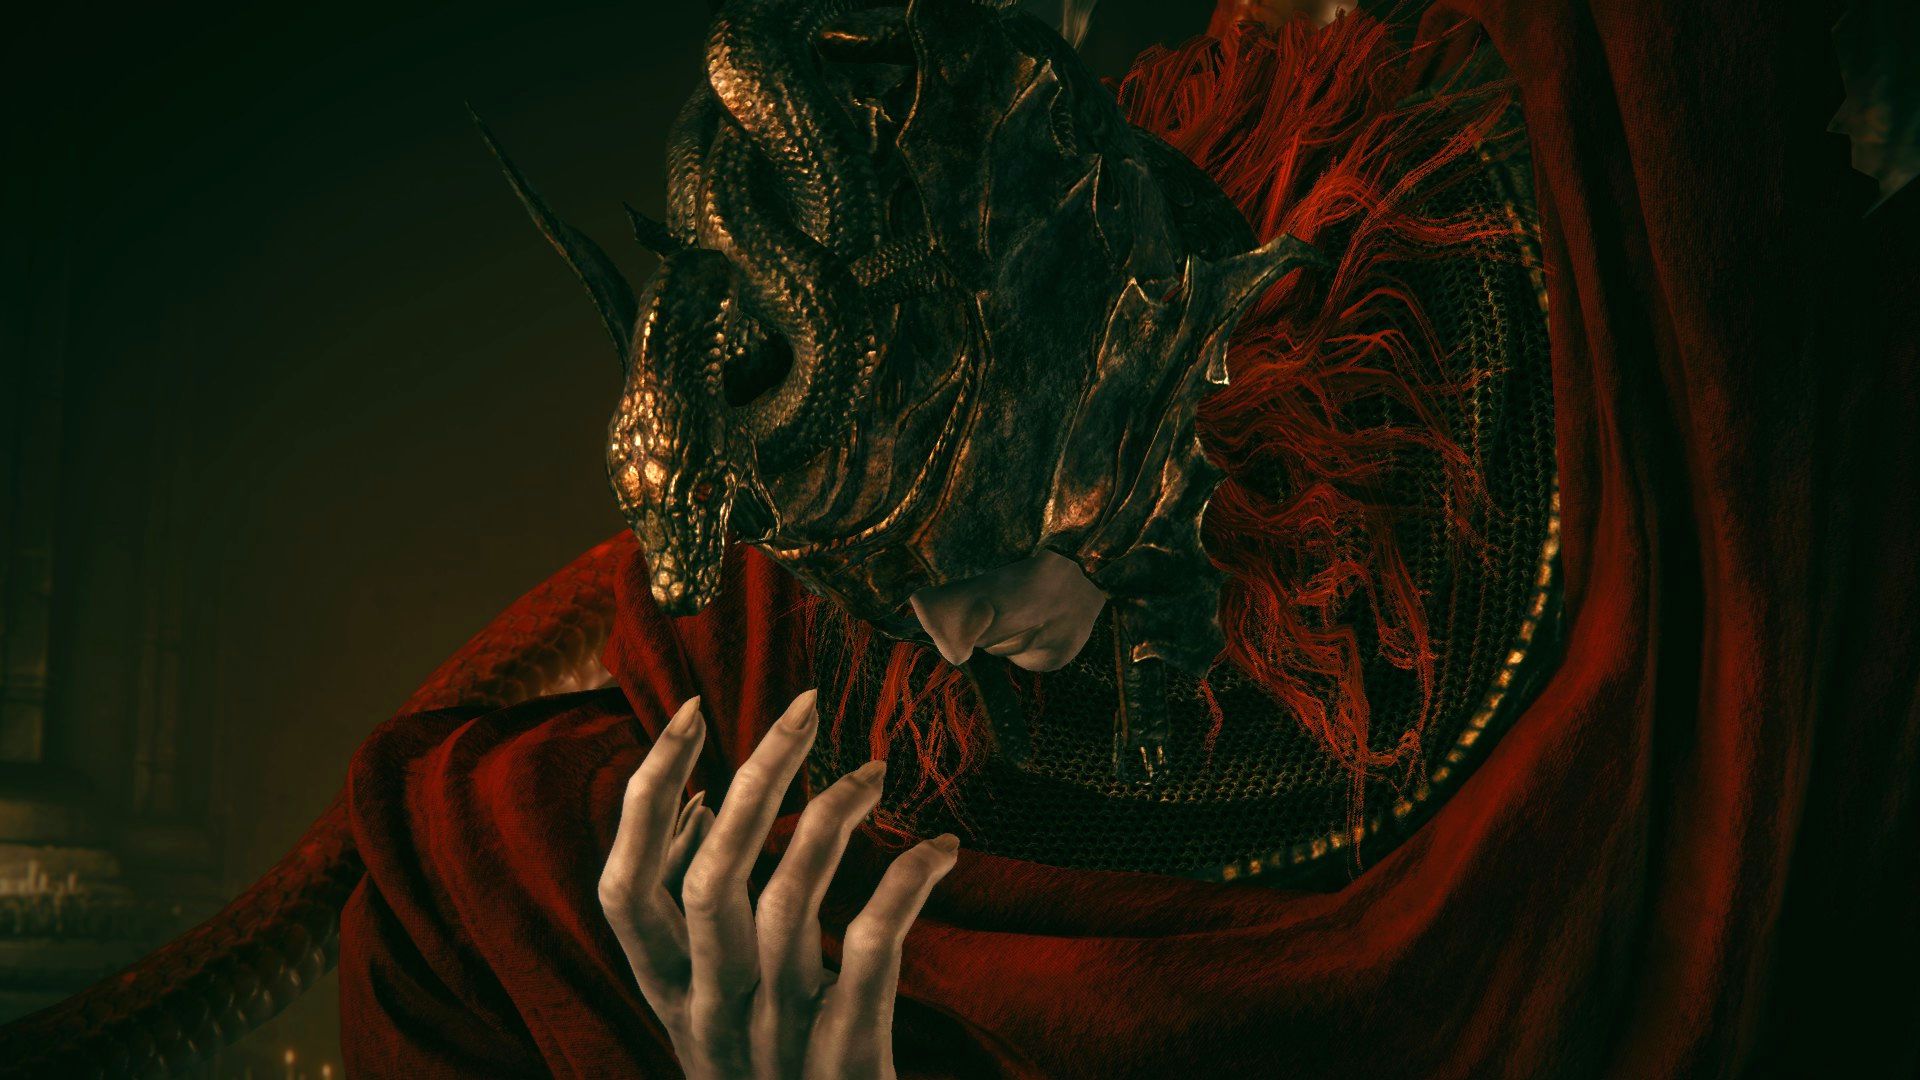 Messmer from Elden Ring: Shadow of the Erdtree looks at his hand, pained, garbed in a flowing red robe.